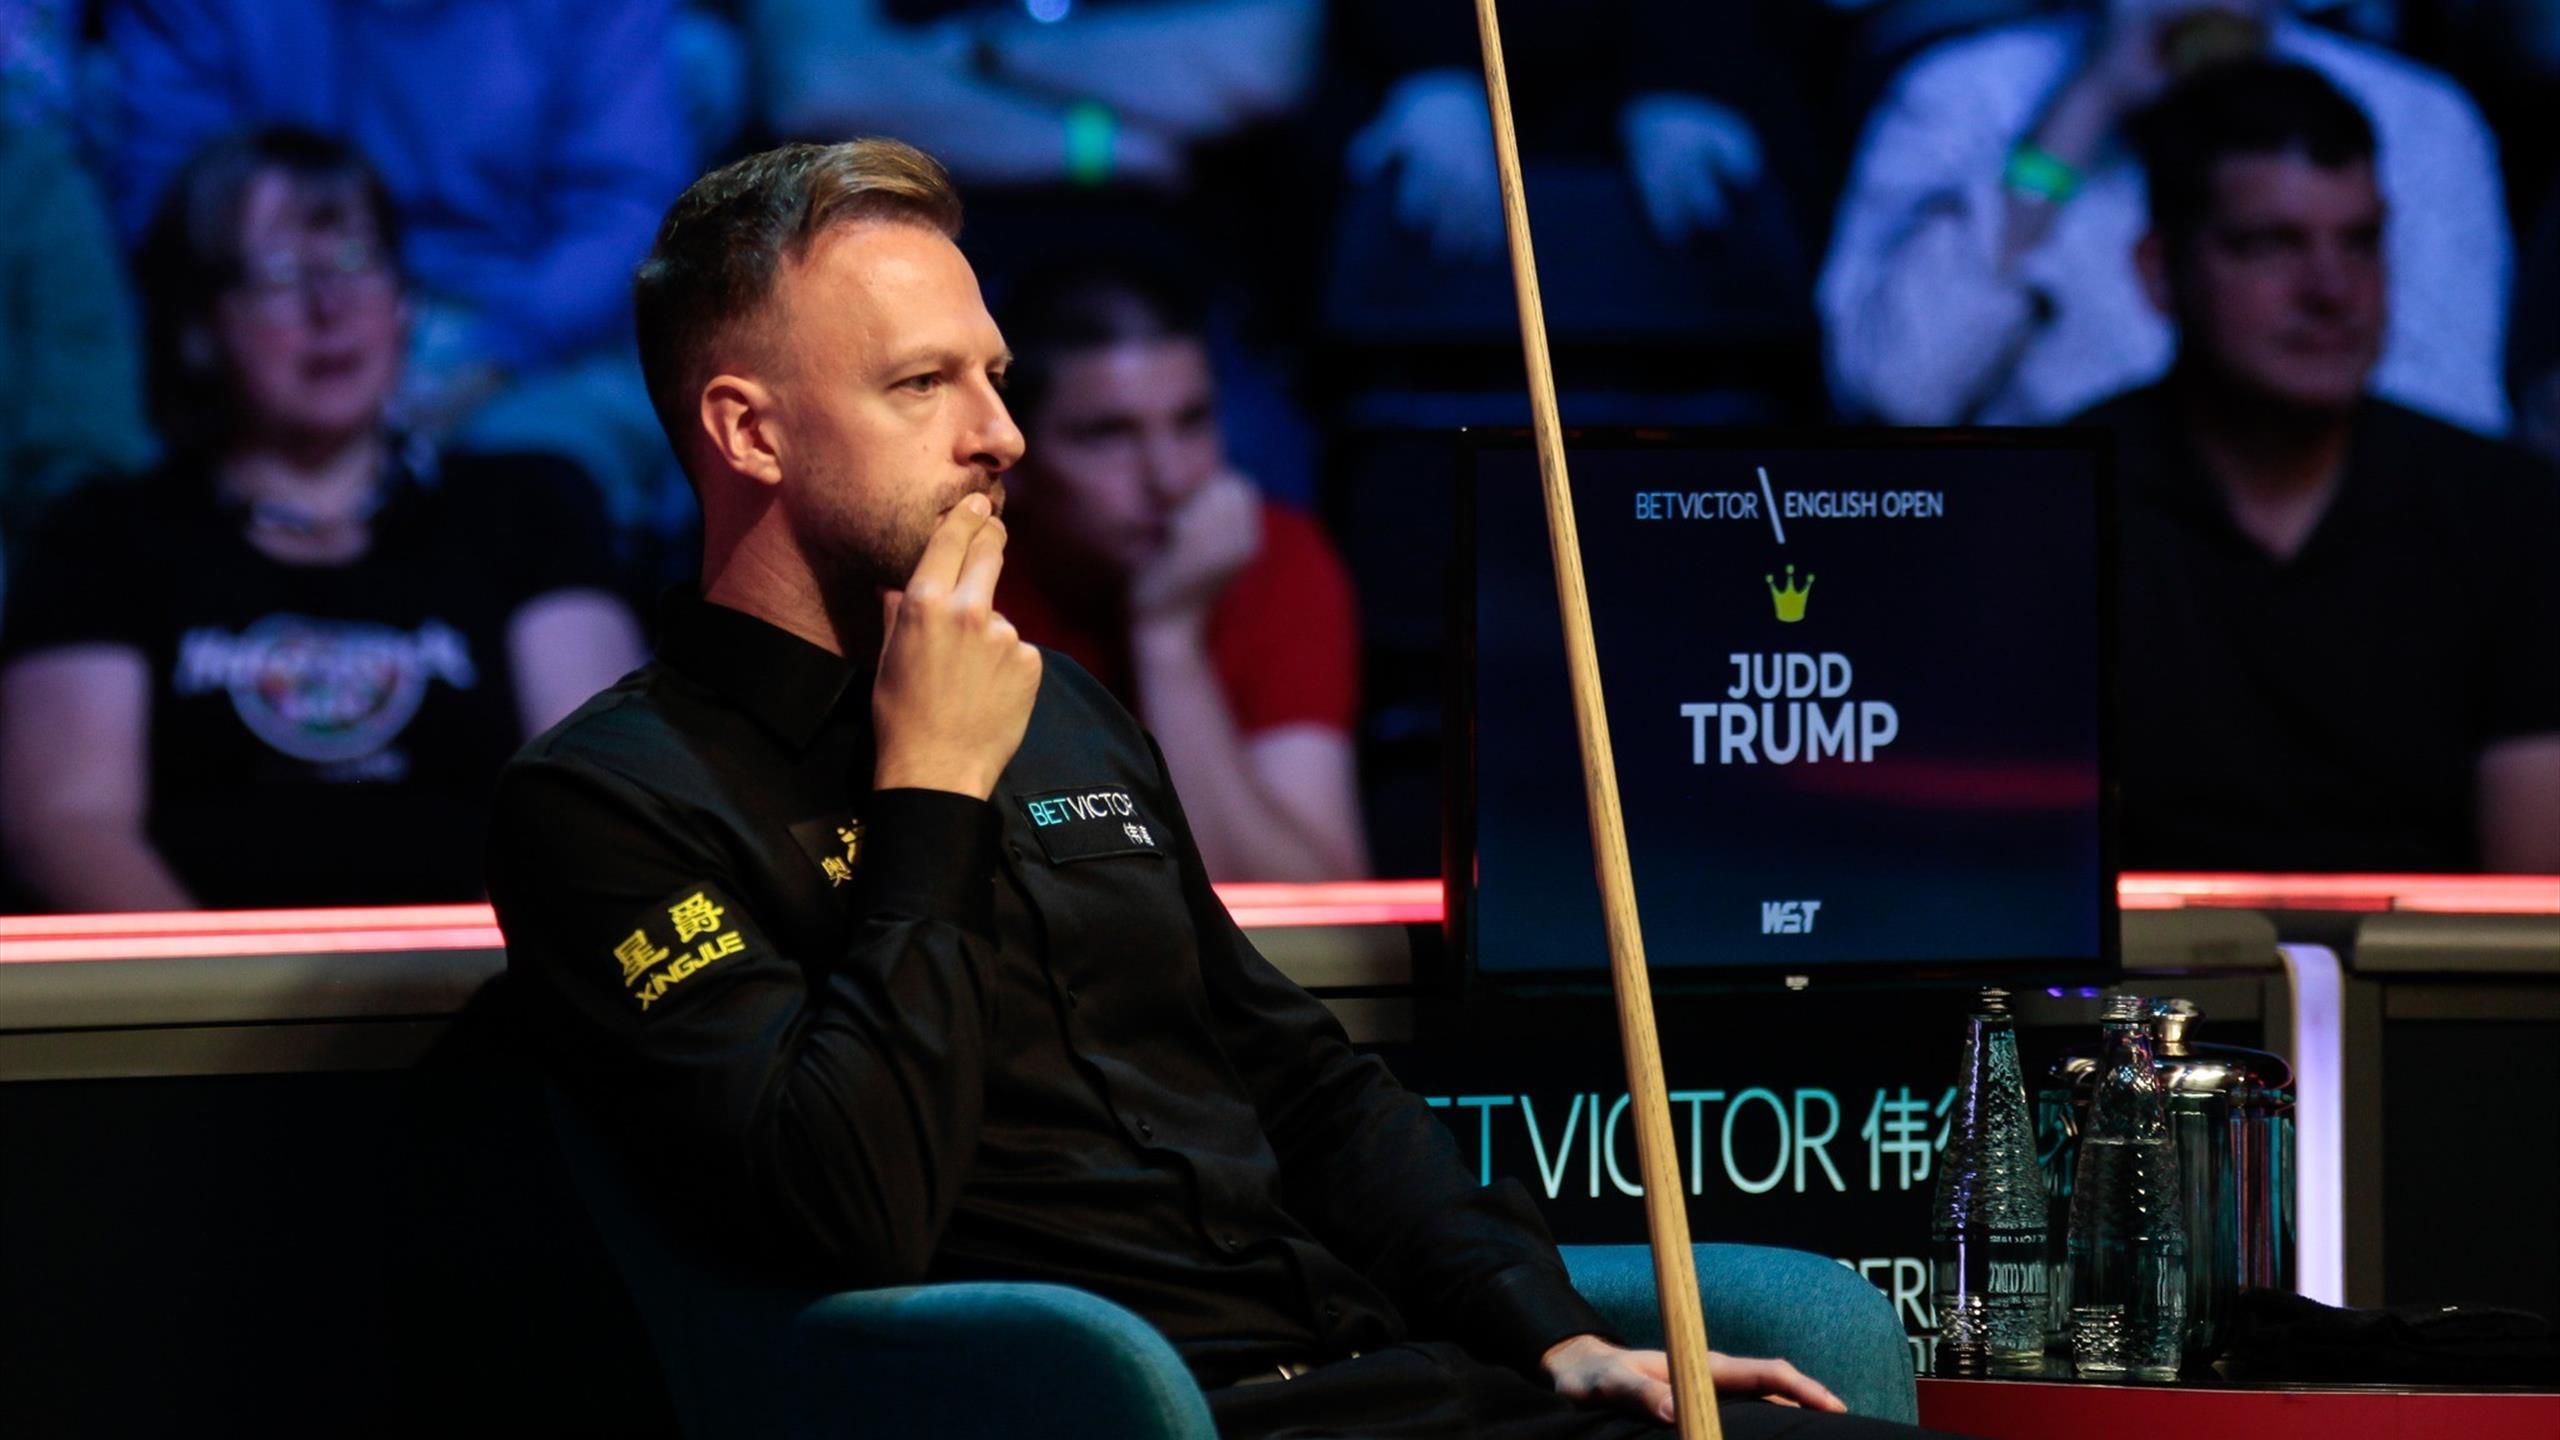 Judd Trump is the favorite for the British Open final